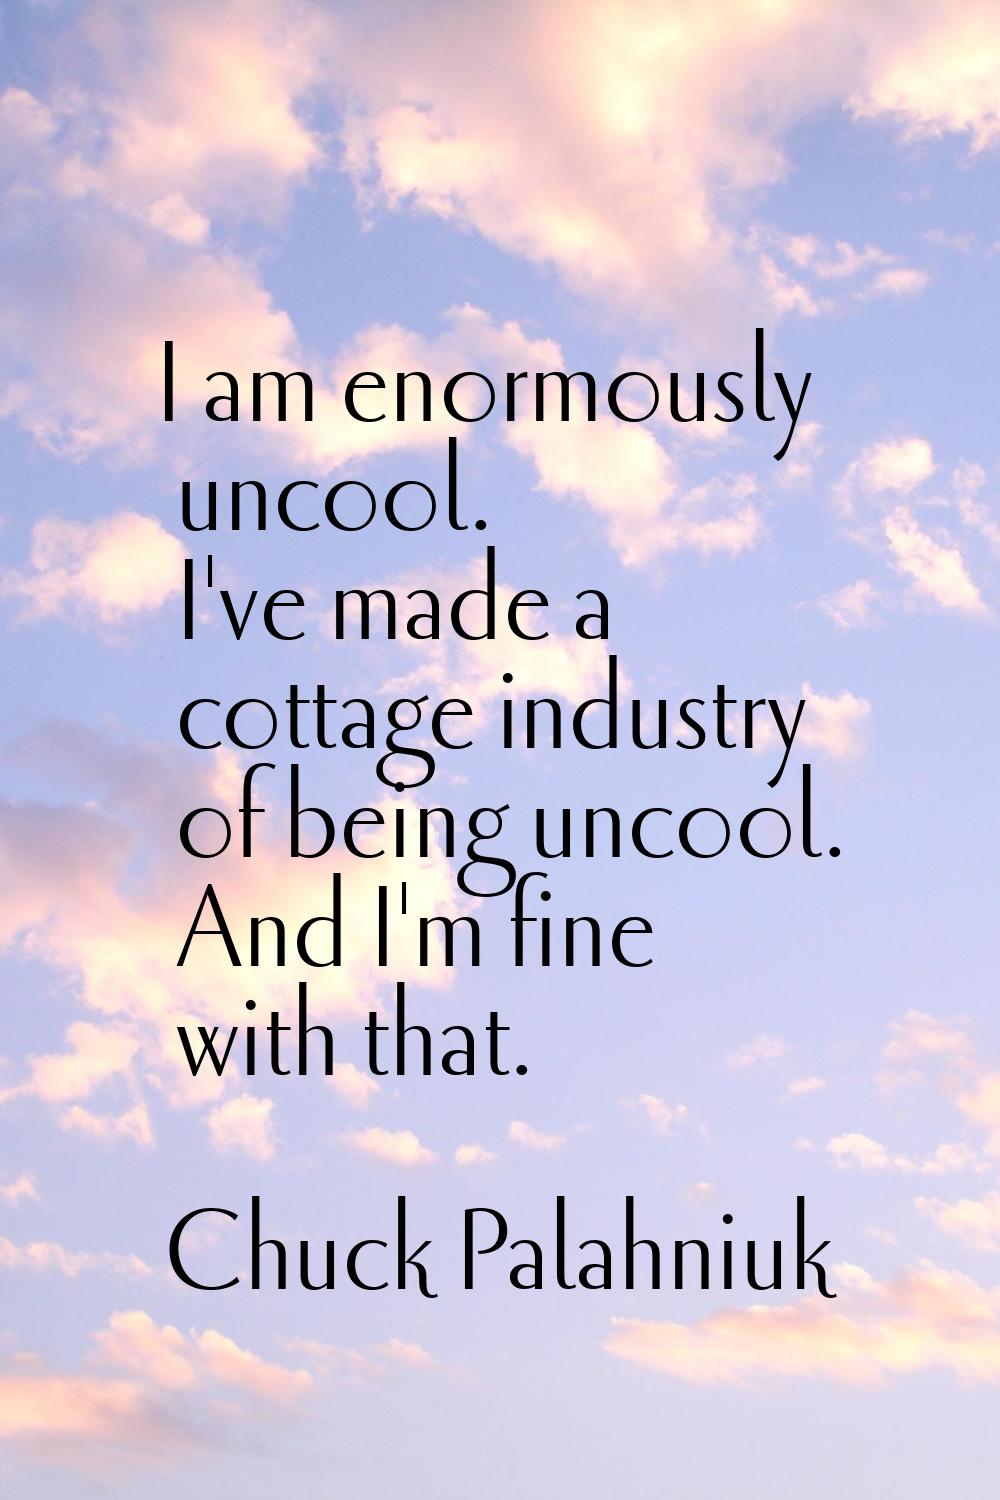 I am enormously uncool. I've made a cottage industry of being uncool. And I'm fine with that.